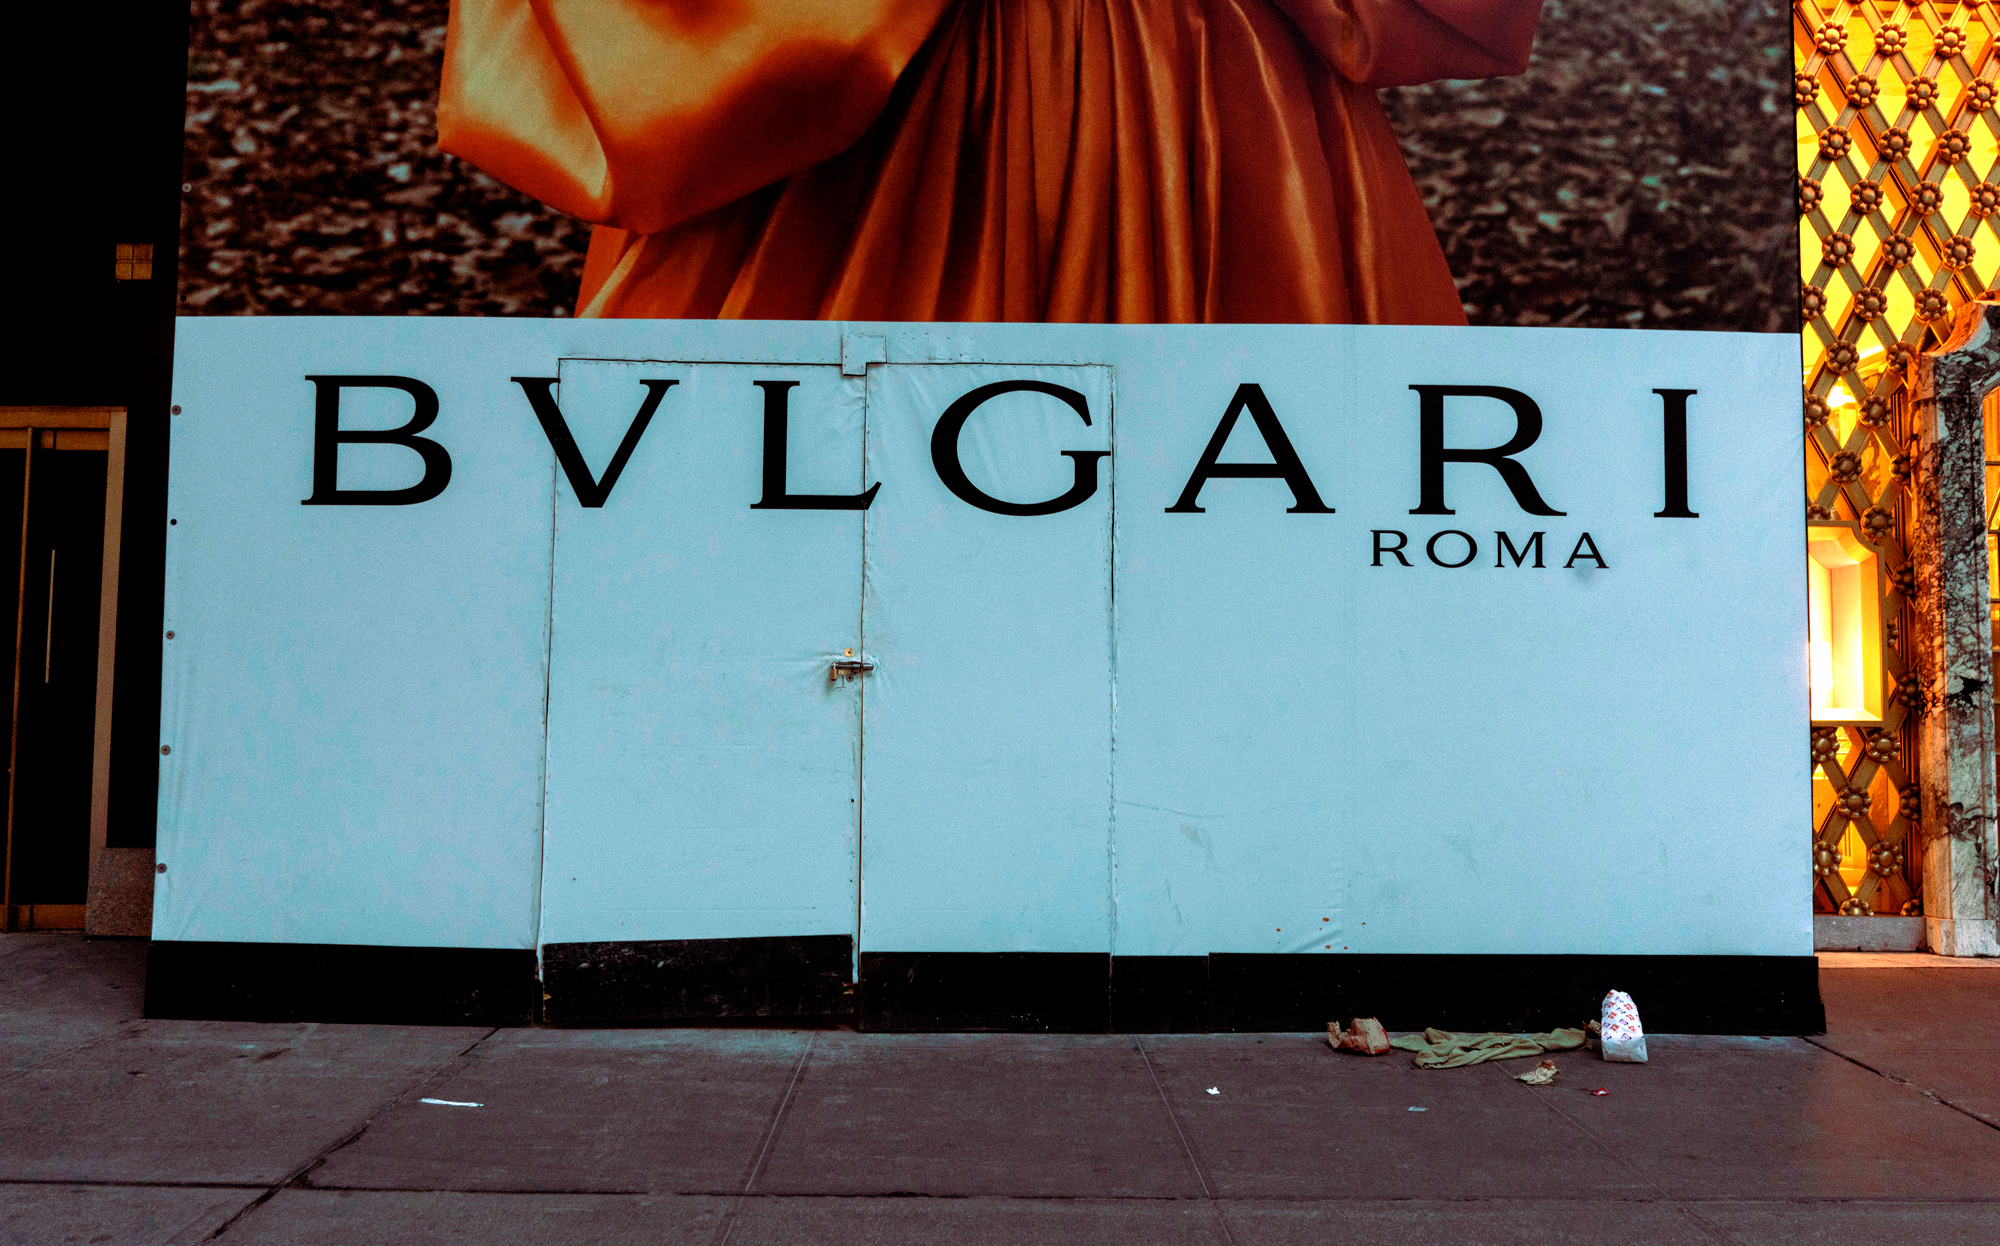 Bvlgari at 730 5th Avenue in New York (Photo by Erin Lefevre/NurPhoto via Getty Images)